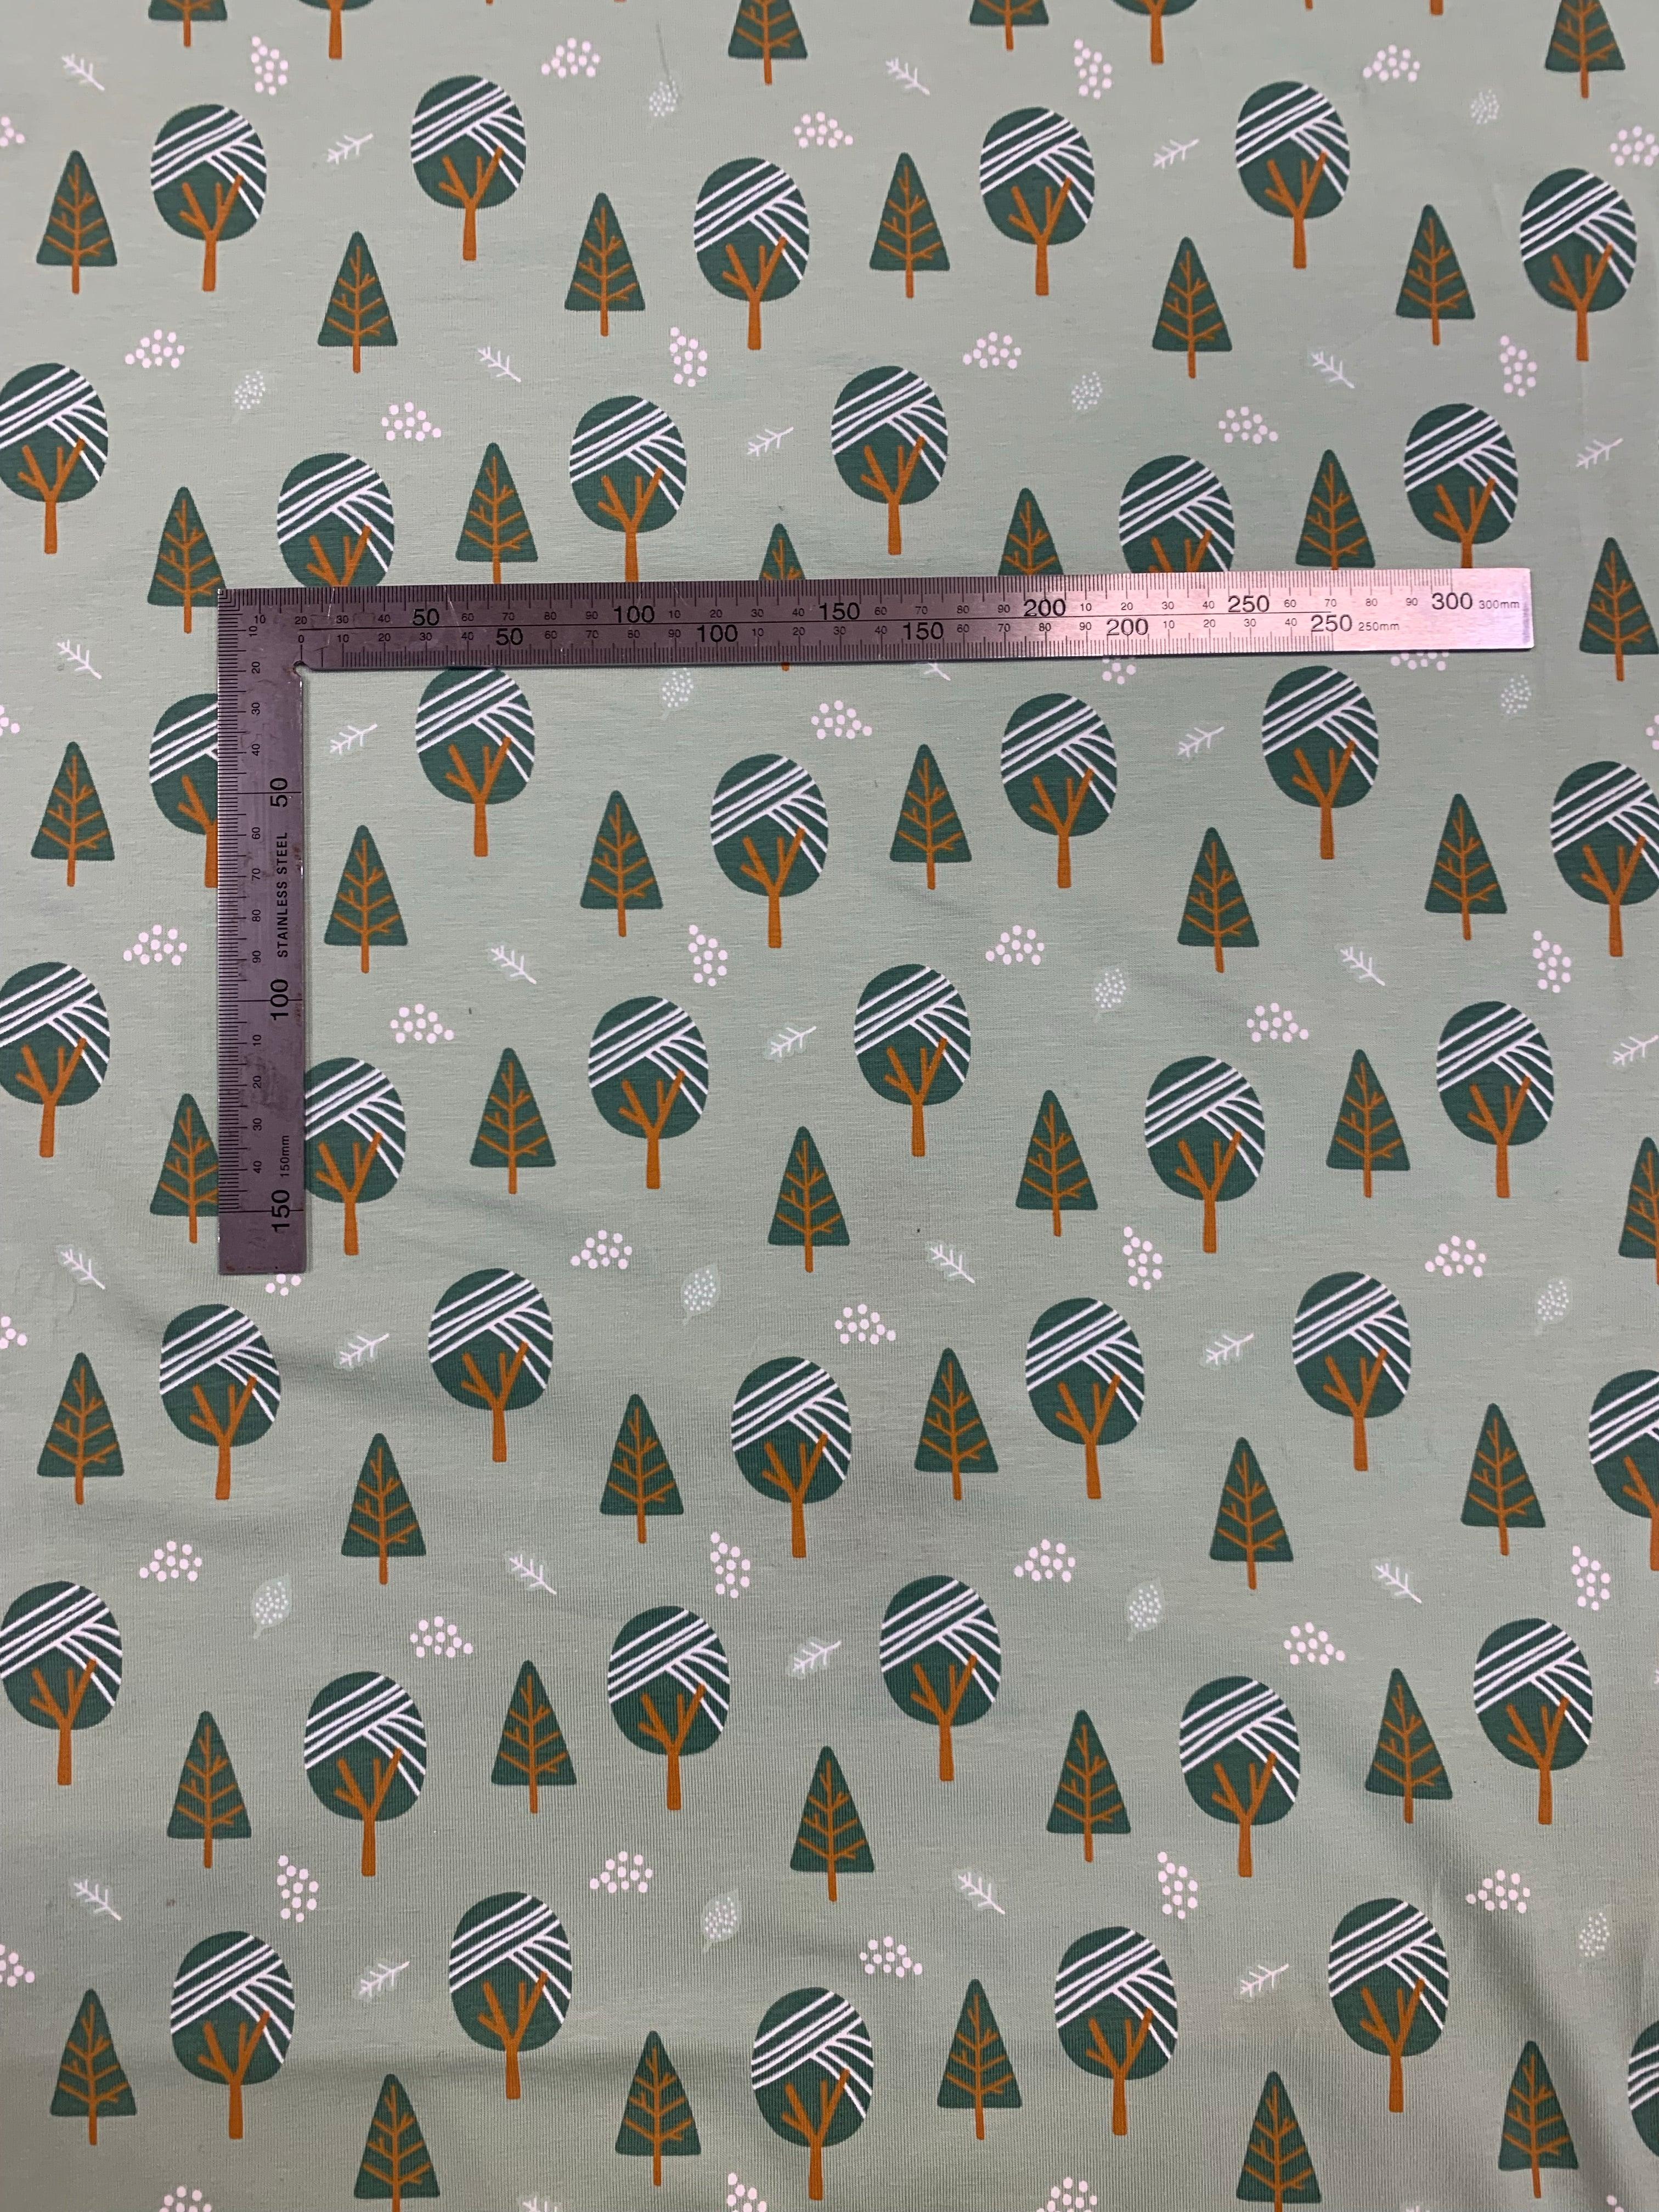 SALE Trees on Mint Cotton Jersey